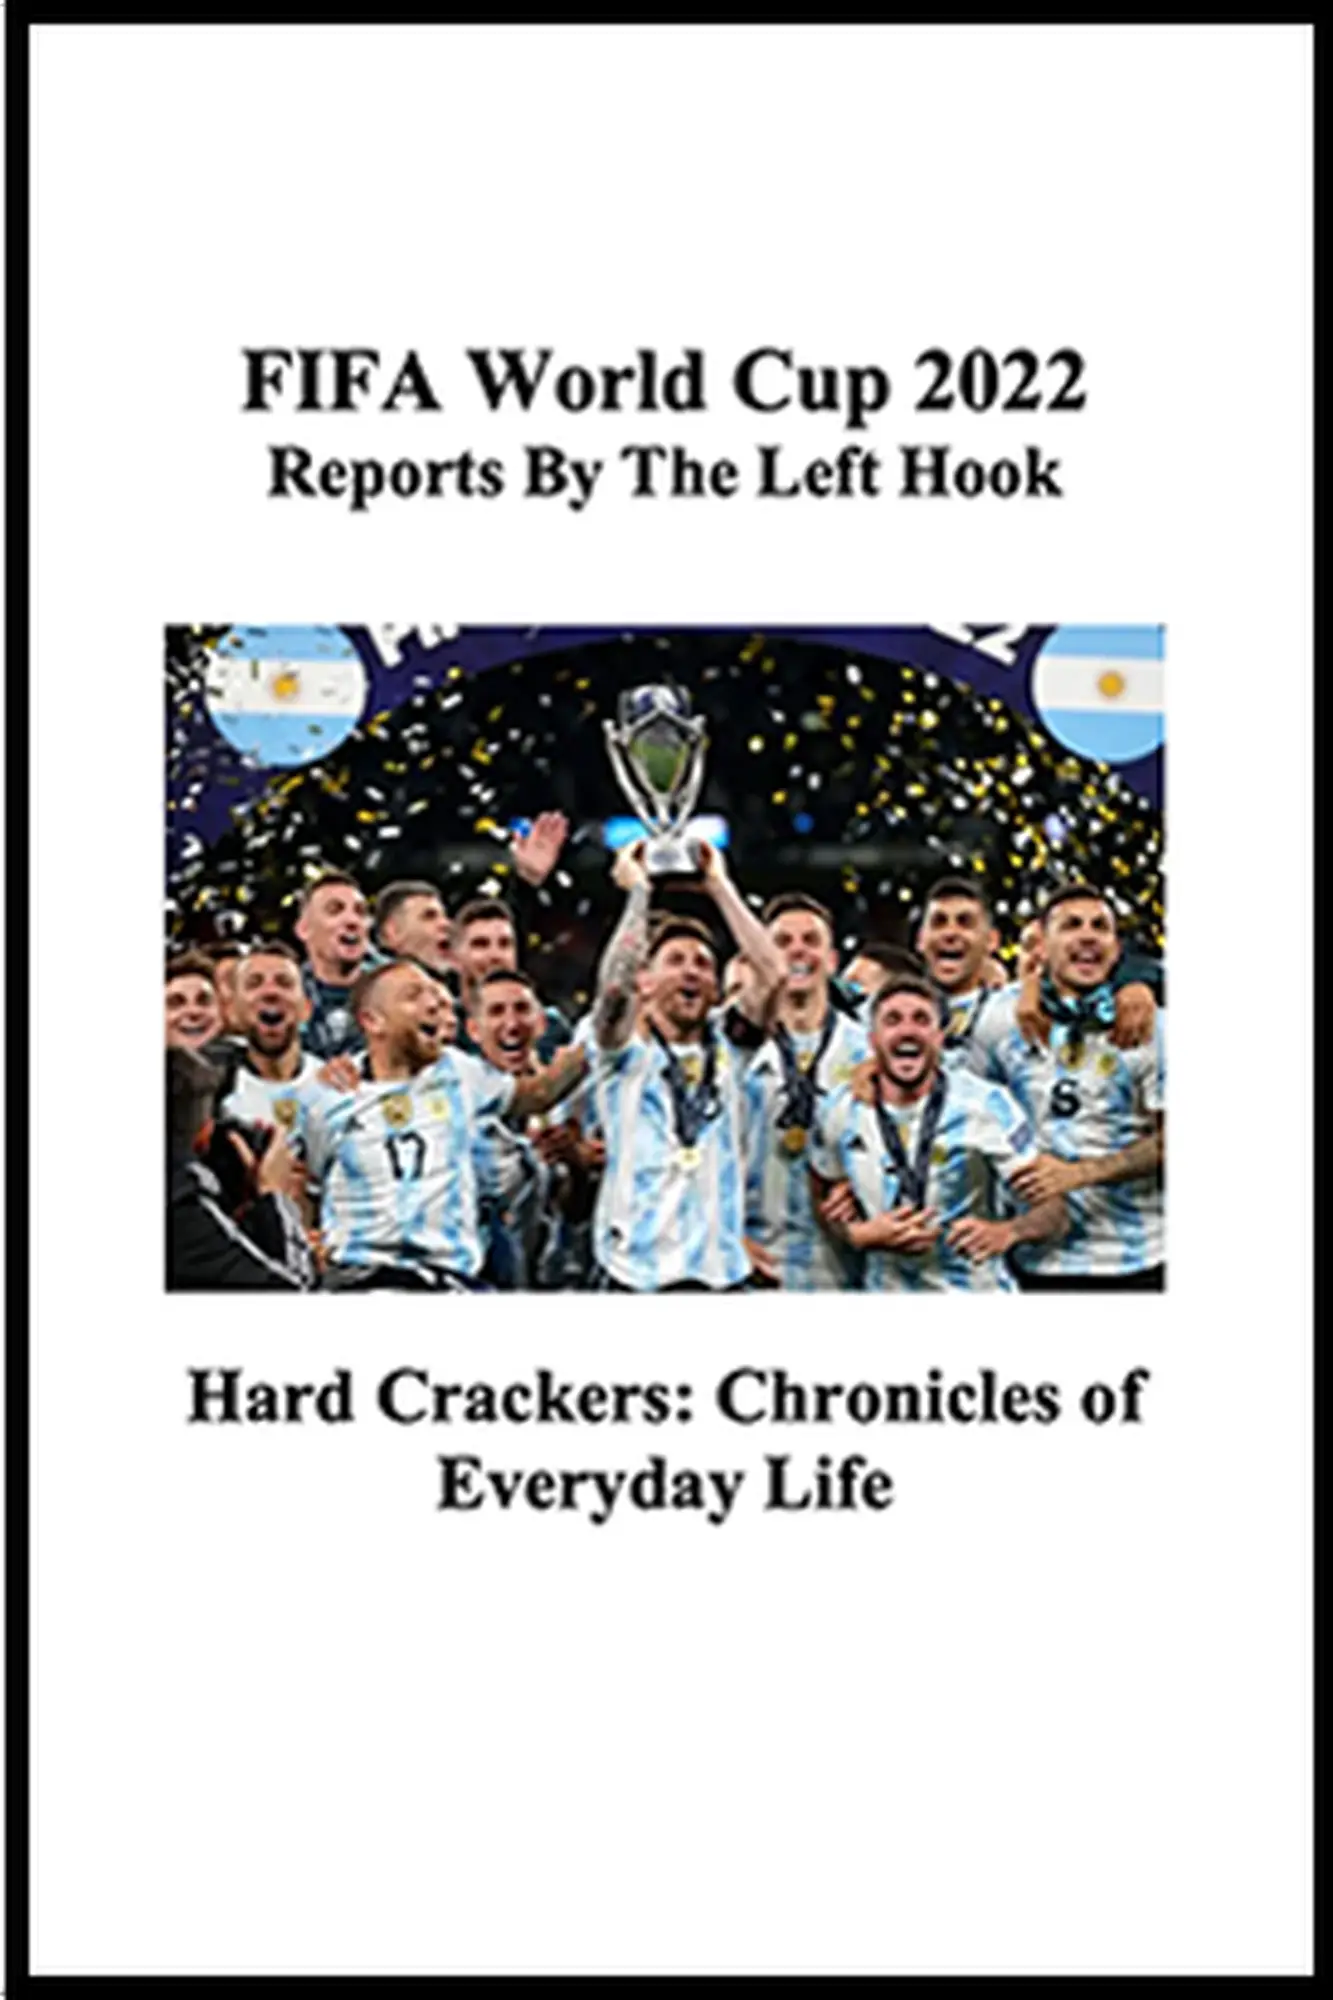 FIFA World Cup 2022, Reports by The Left Hook